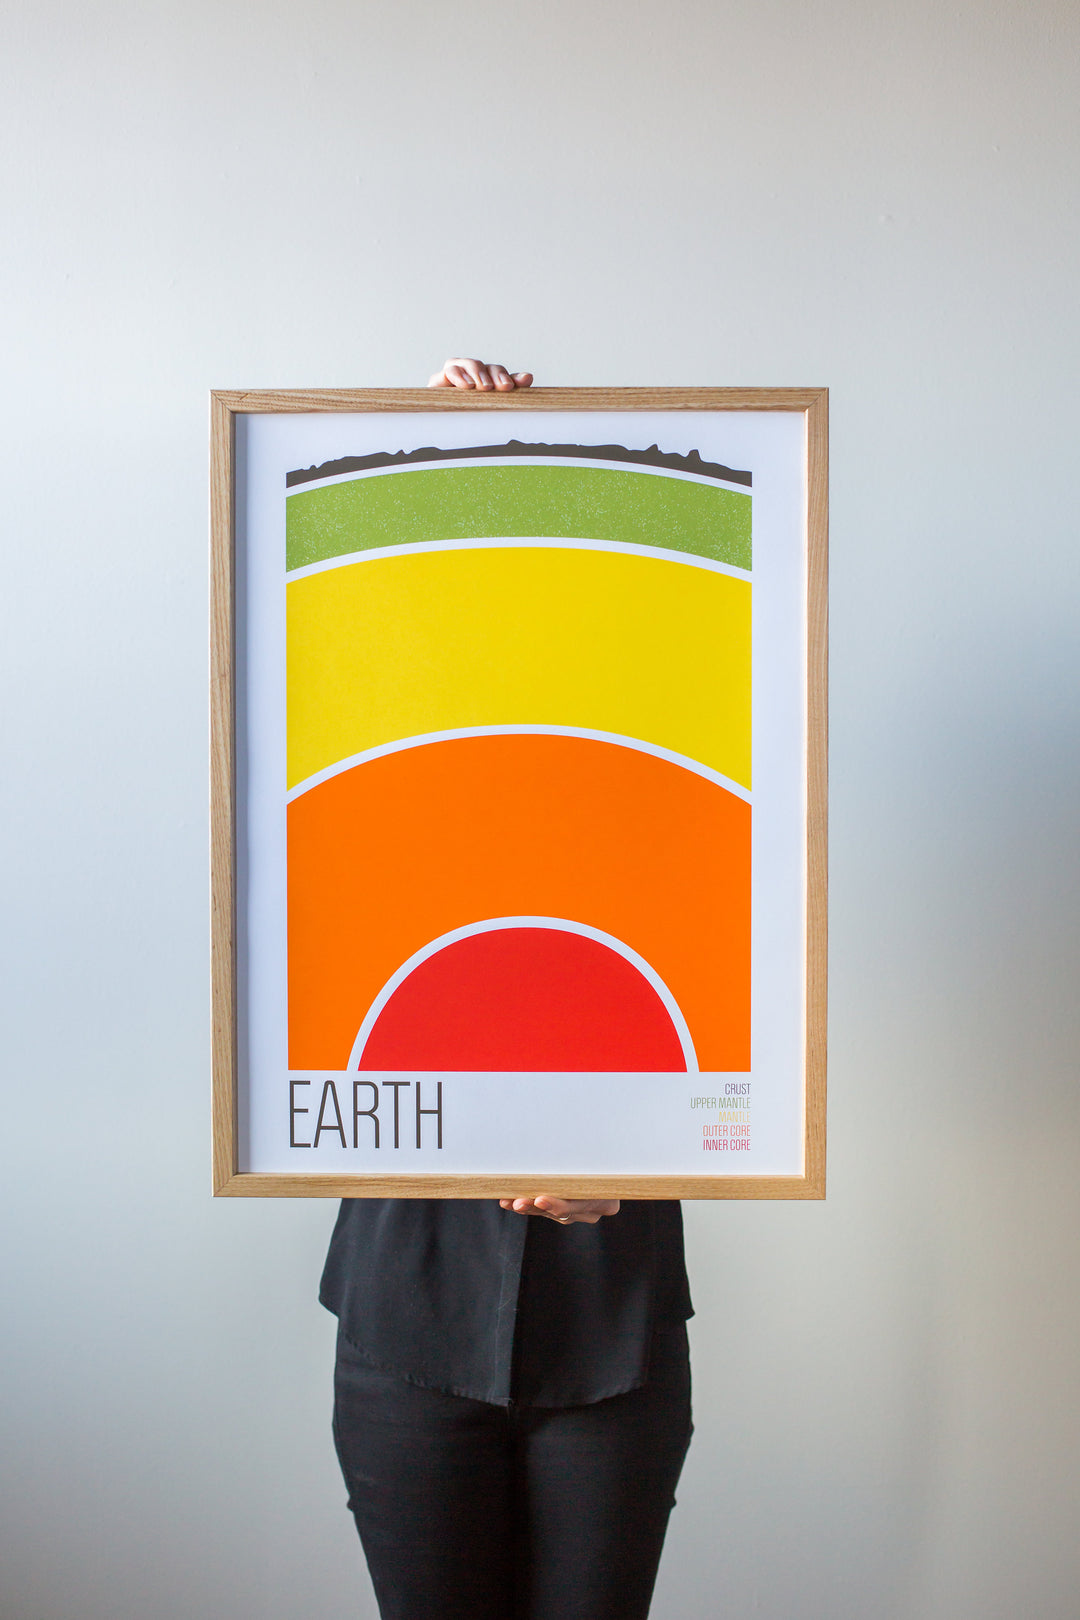 Earth Print by Brainstorm - Earth Print by Brainstorm - Inner Core, Outer Core, Mantle, Upper Mantle, Crust